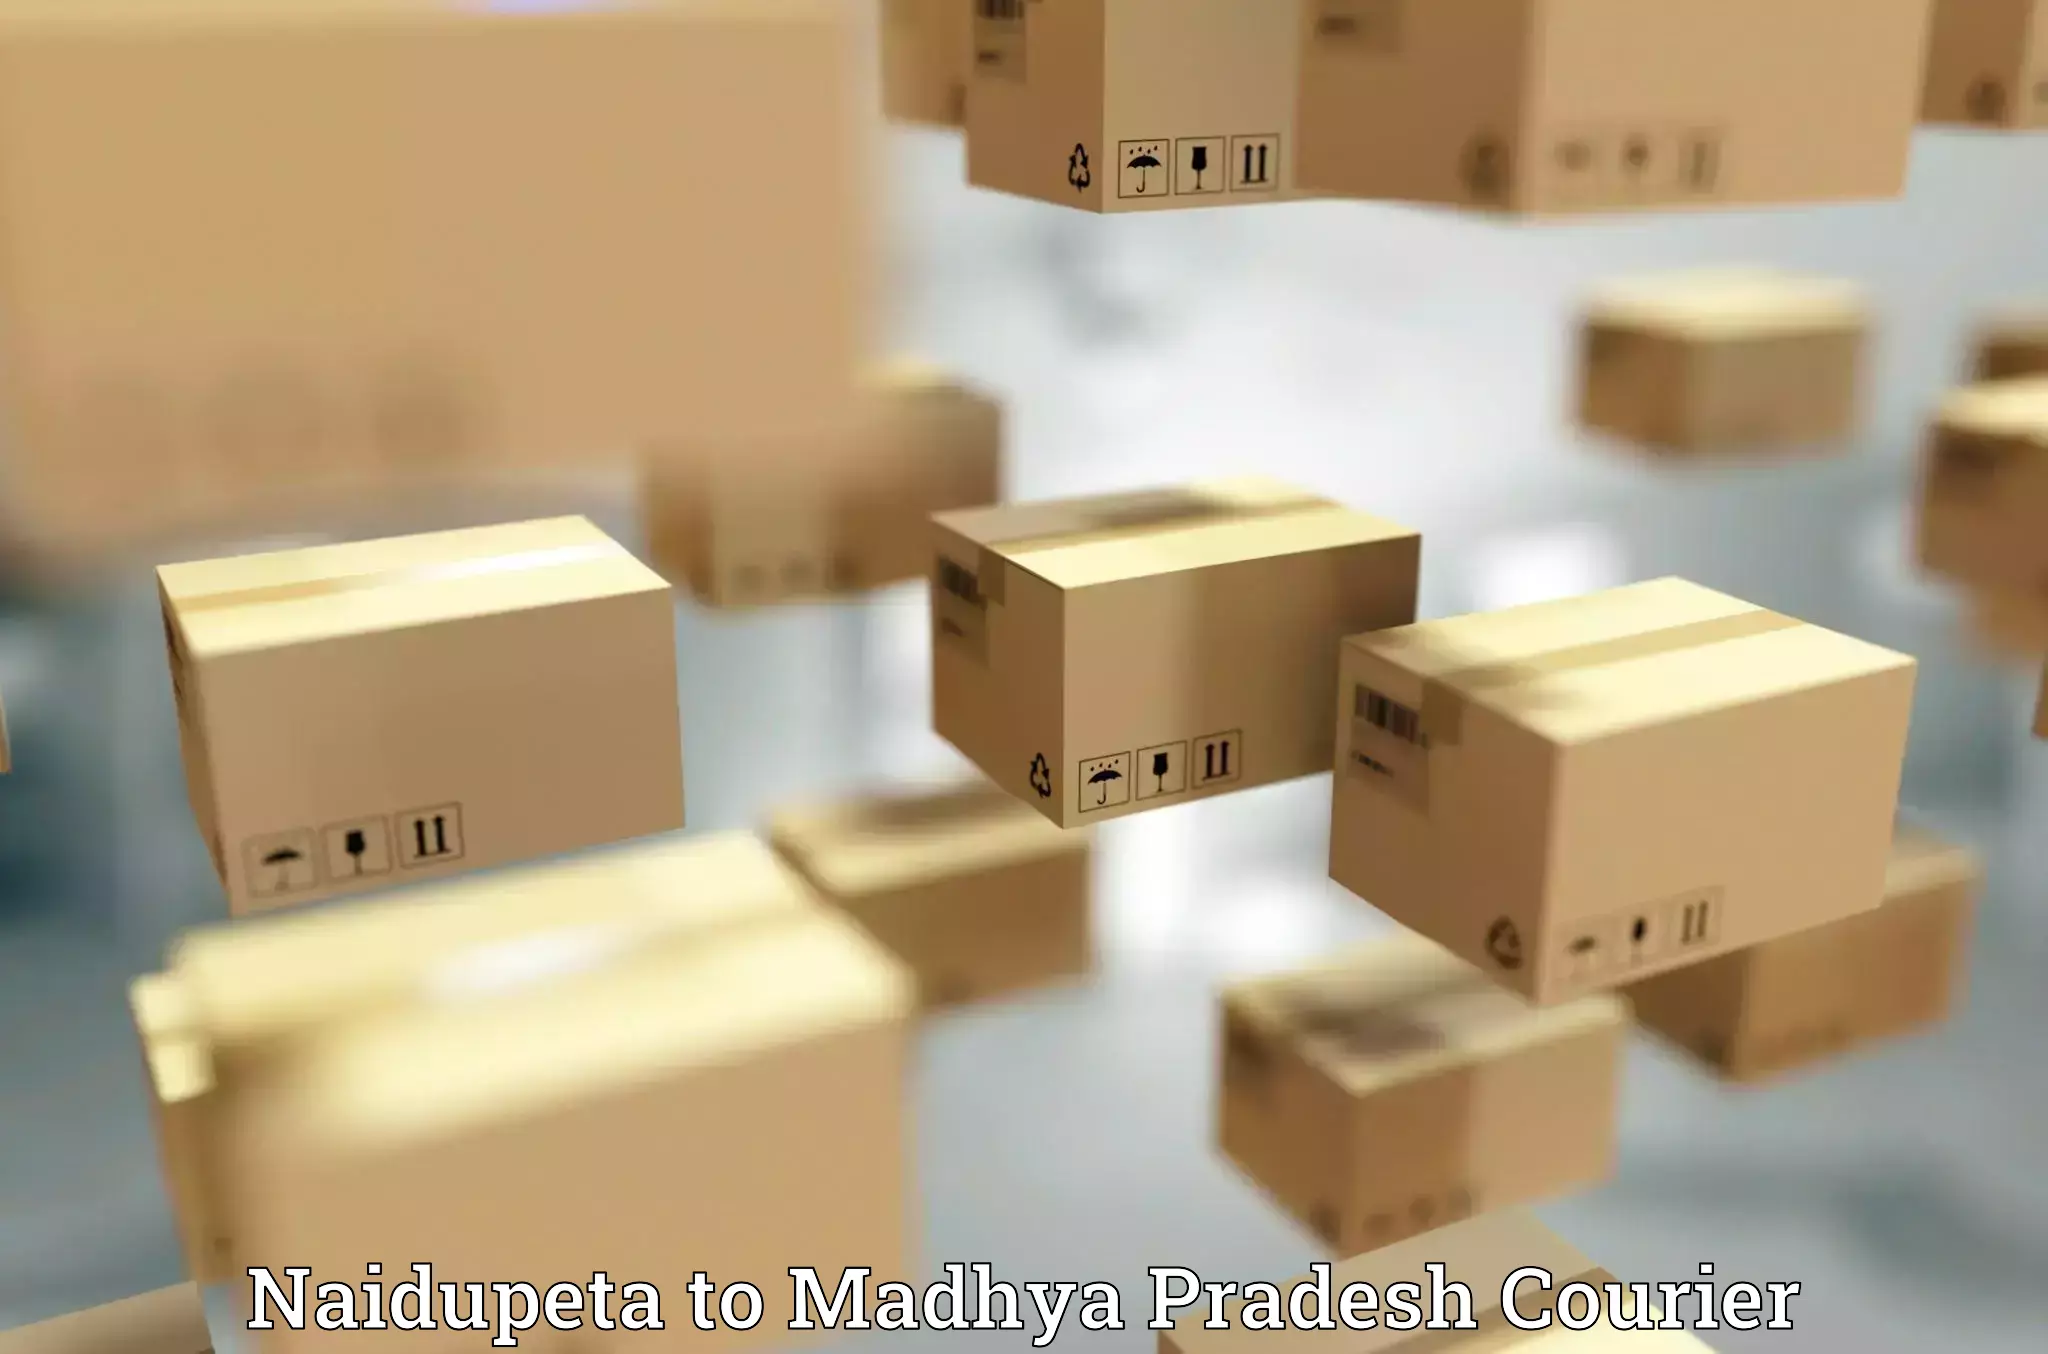 Speedy delivery service Naidupeta to Athner